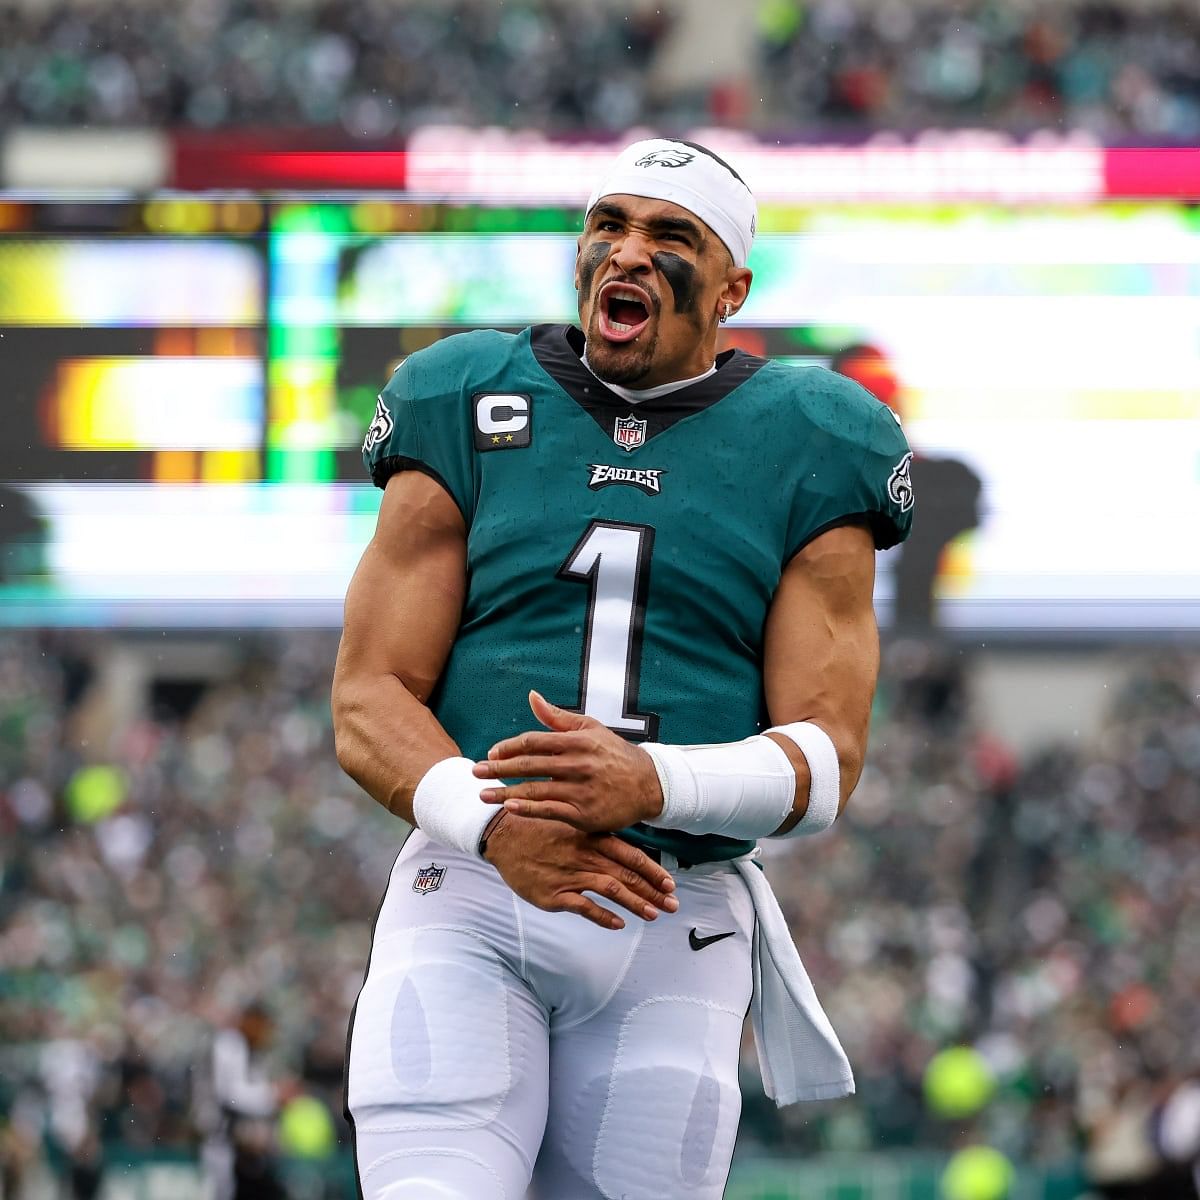 Will Jalen Hurts become the Eagles' greatest QB of all time